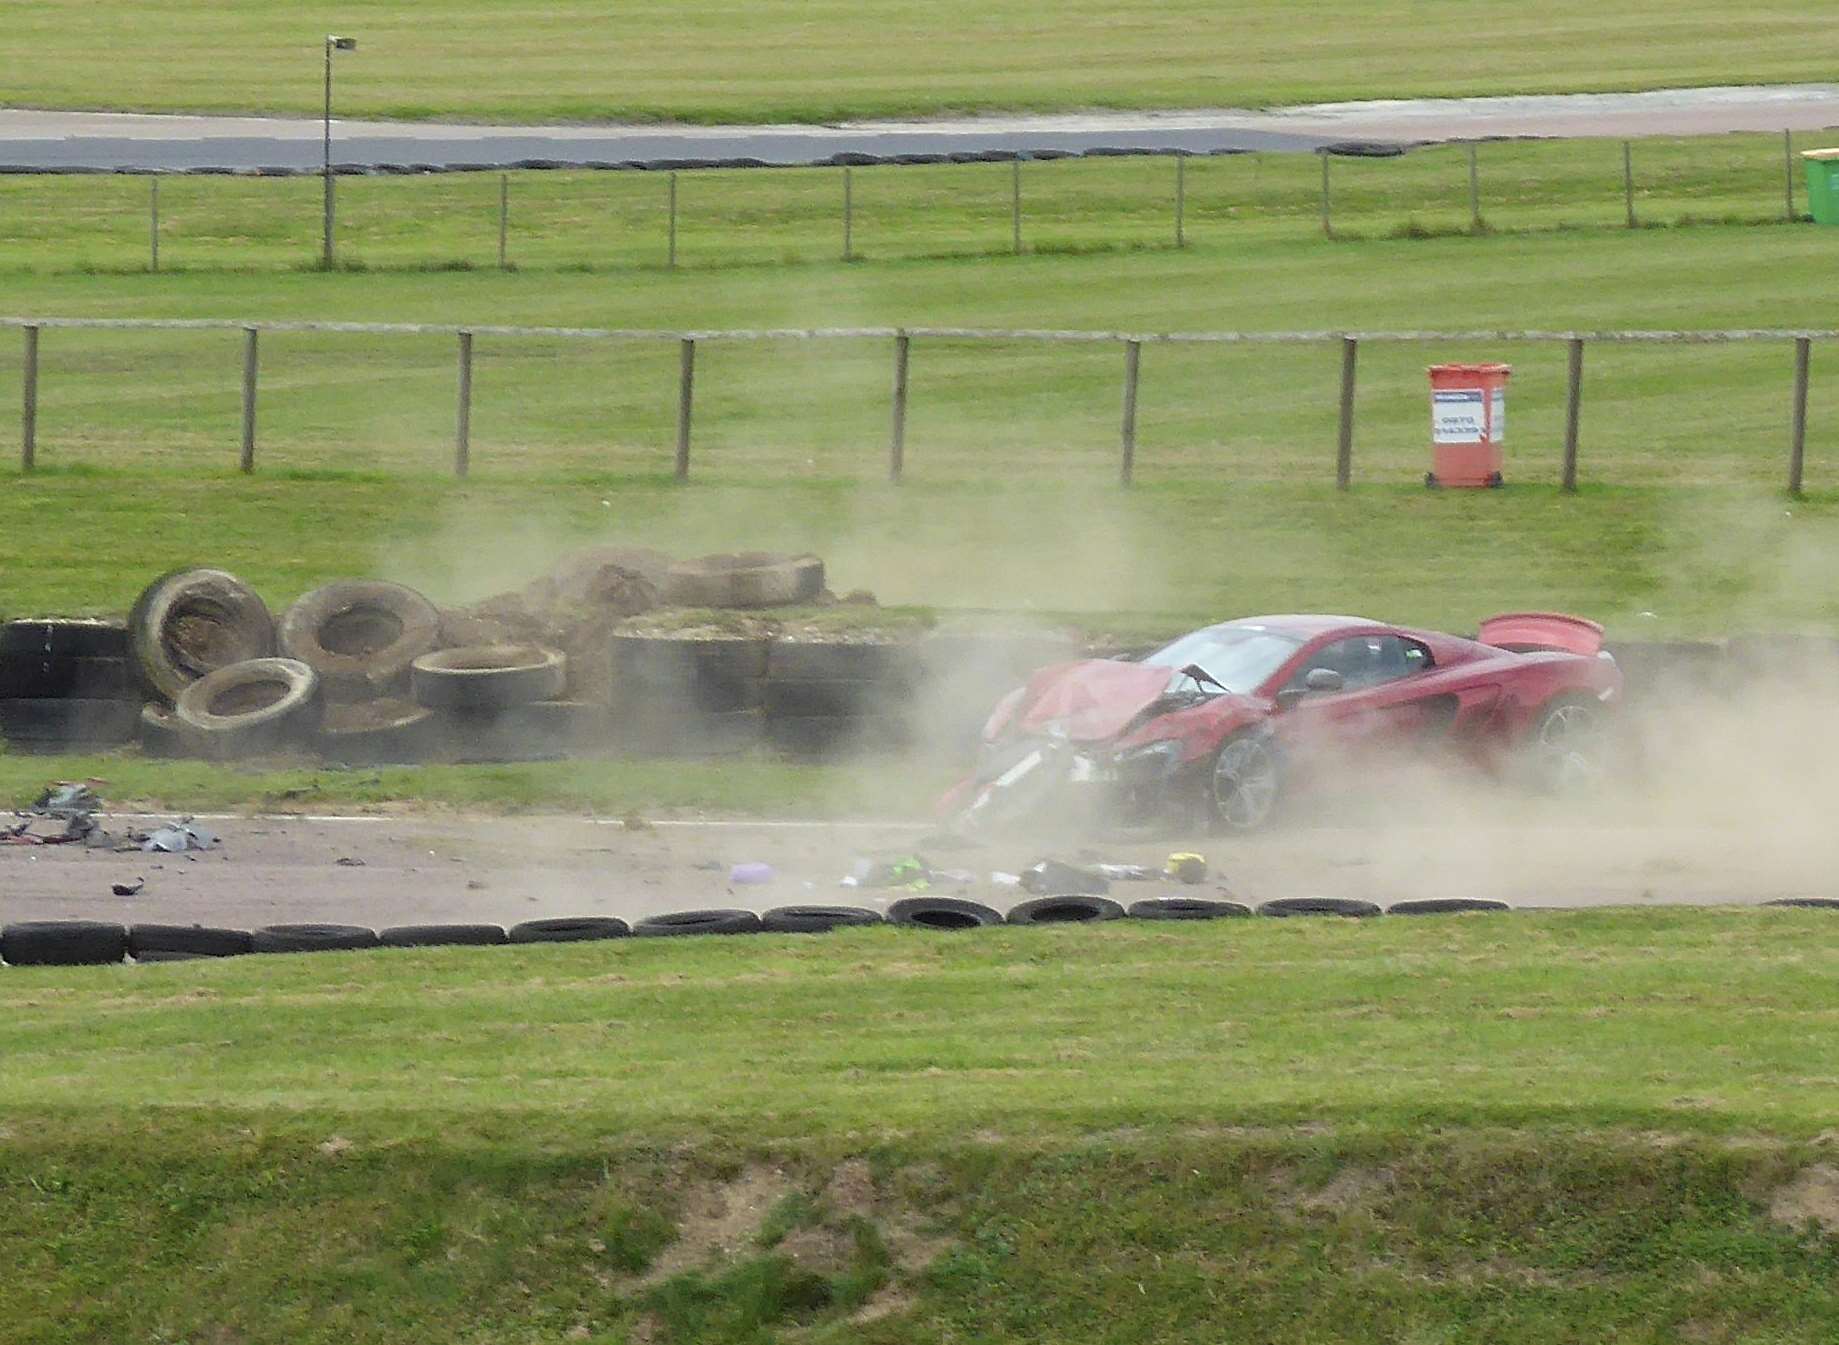 This is the moment Oliver Bennett crashed the £350k McLaren. Pictures: SWNS